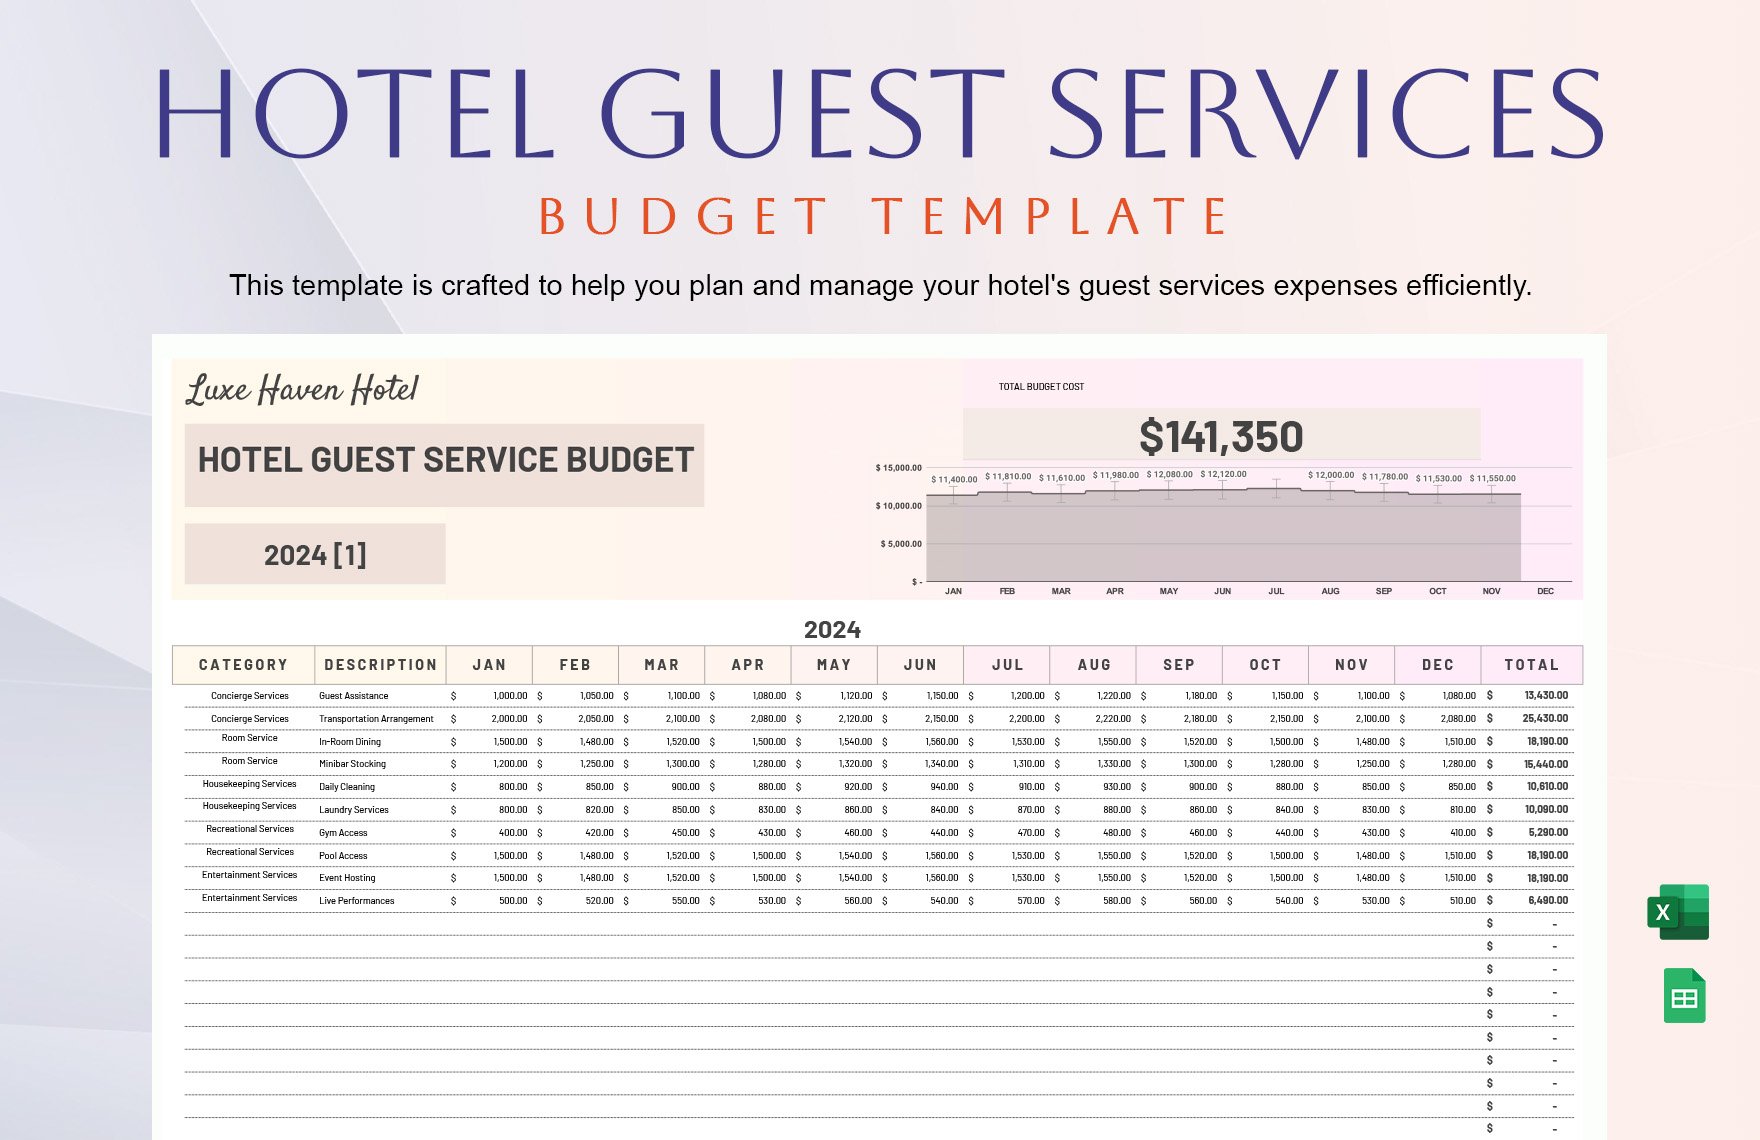 Hotel Guest Services Budget Template